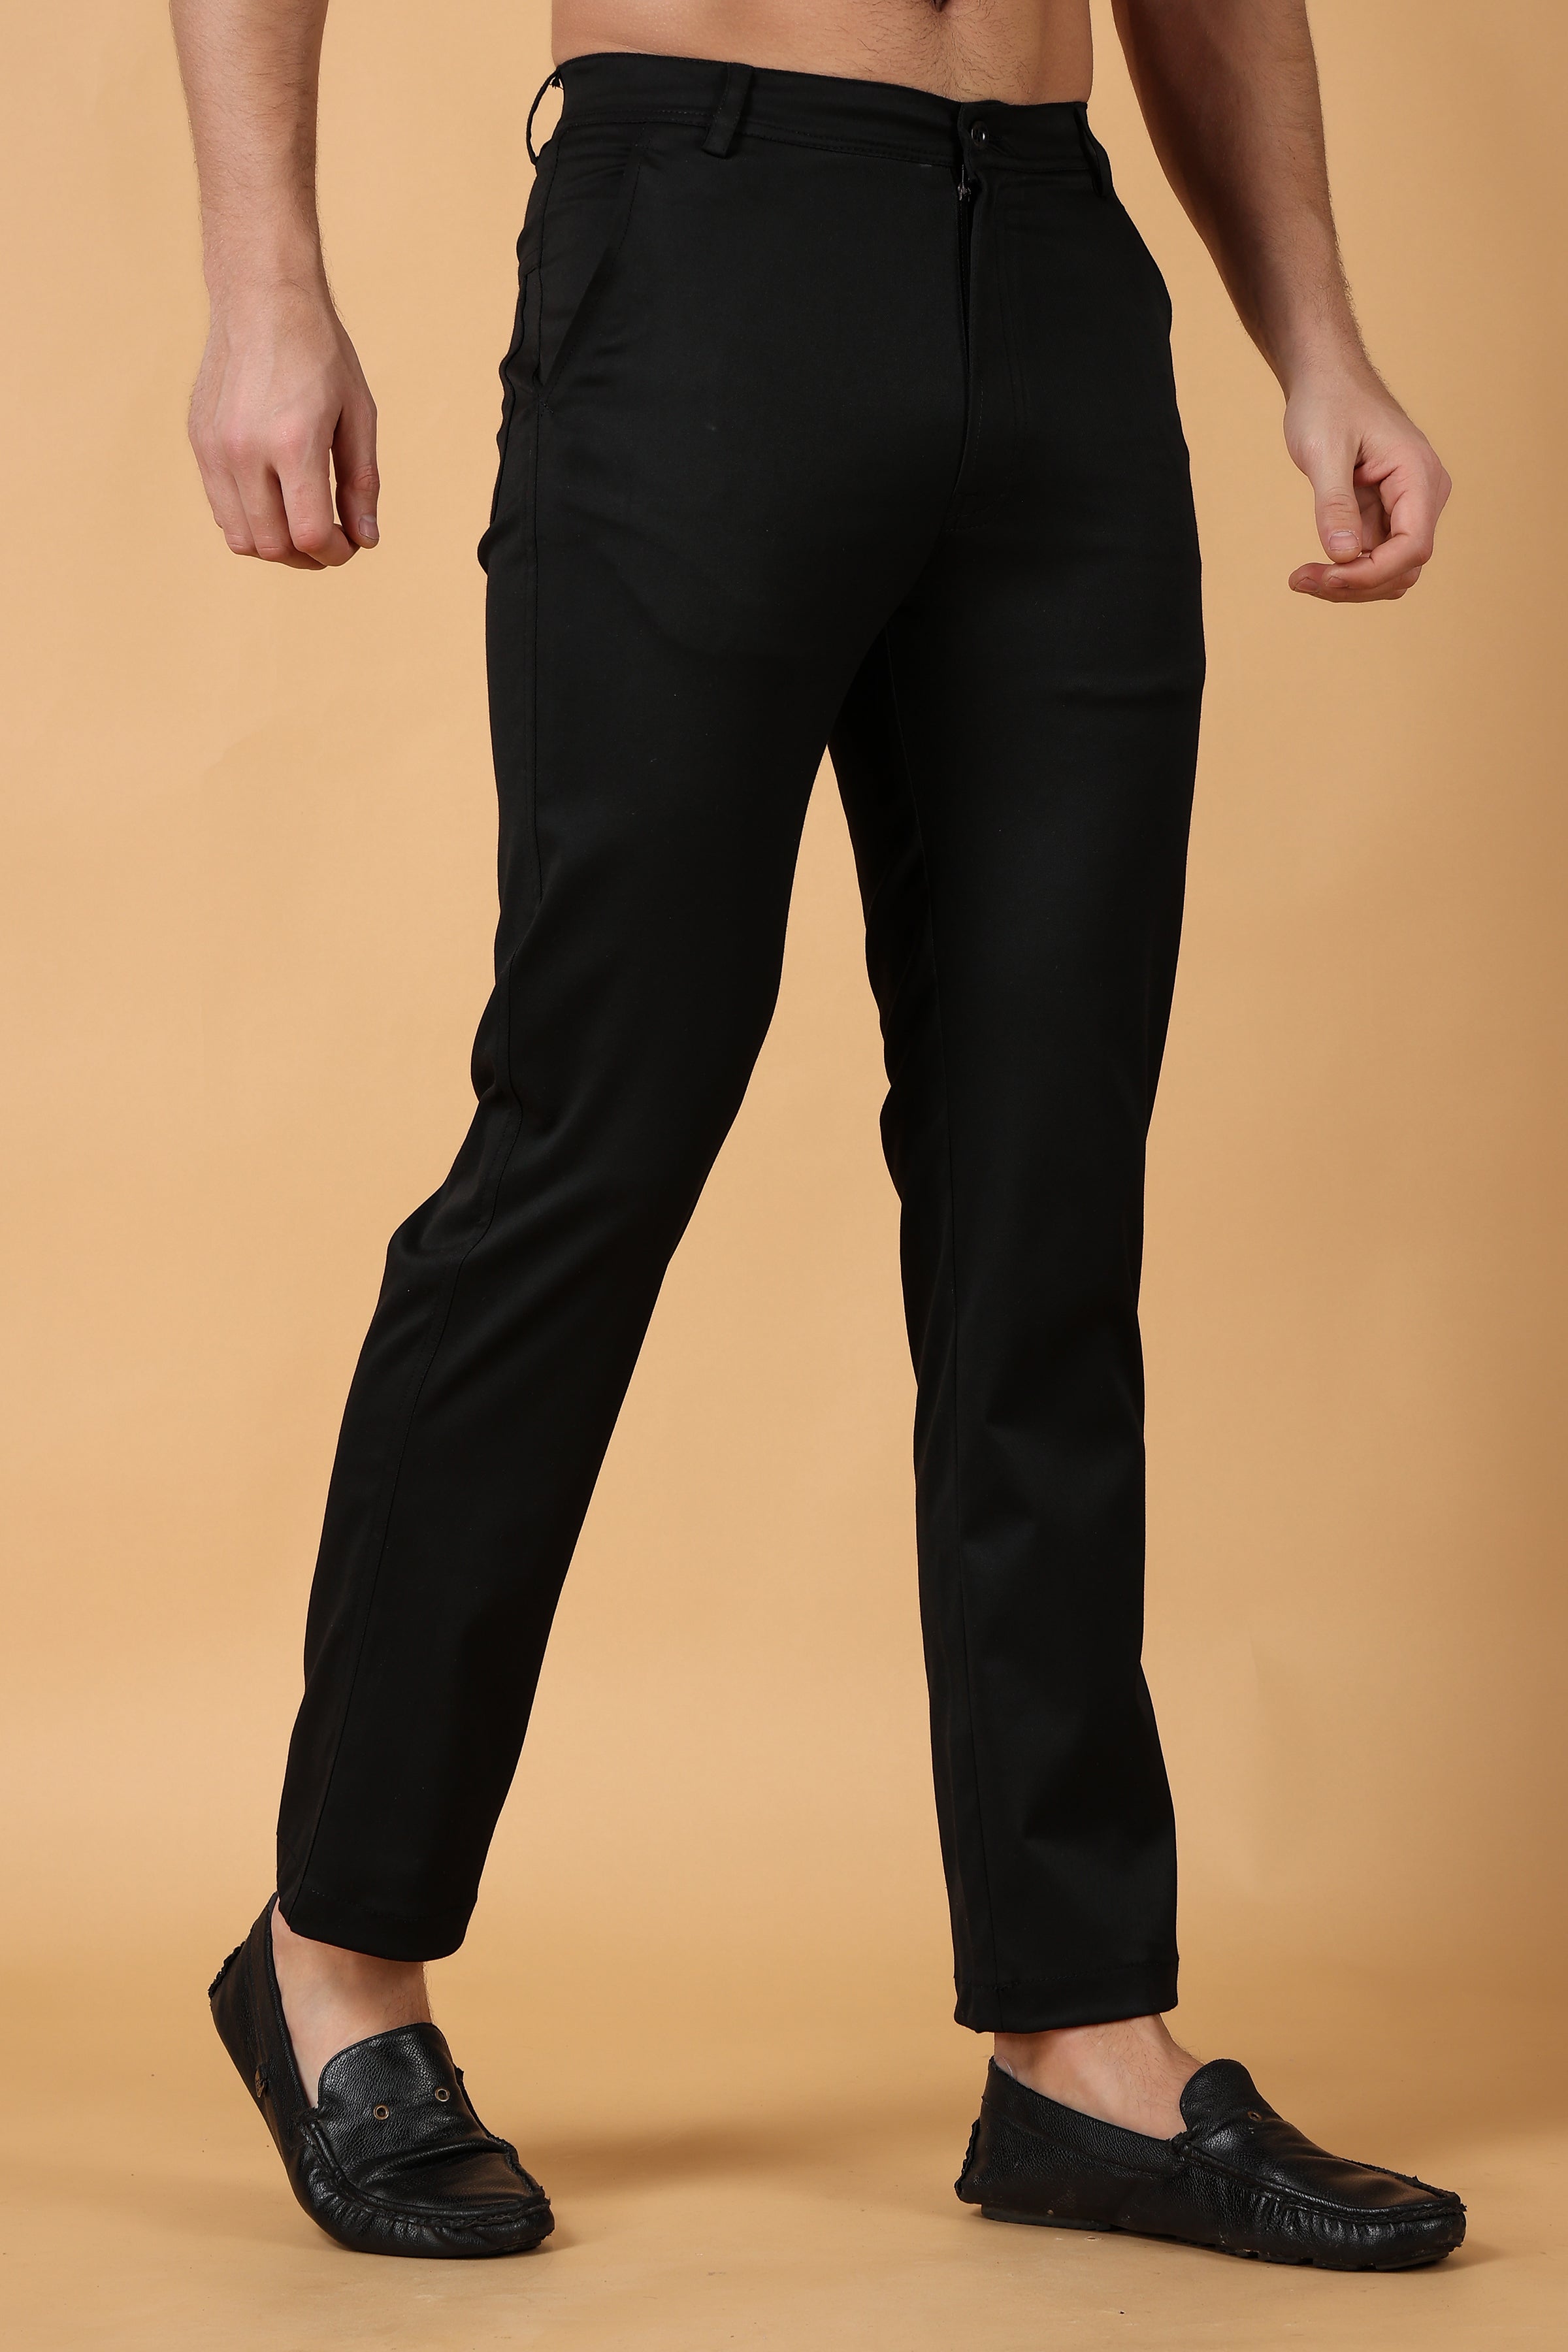 Cotton chinos Skinny Fit  Black  Men  HM IN